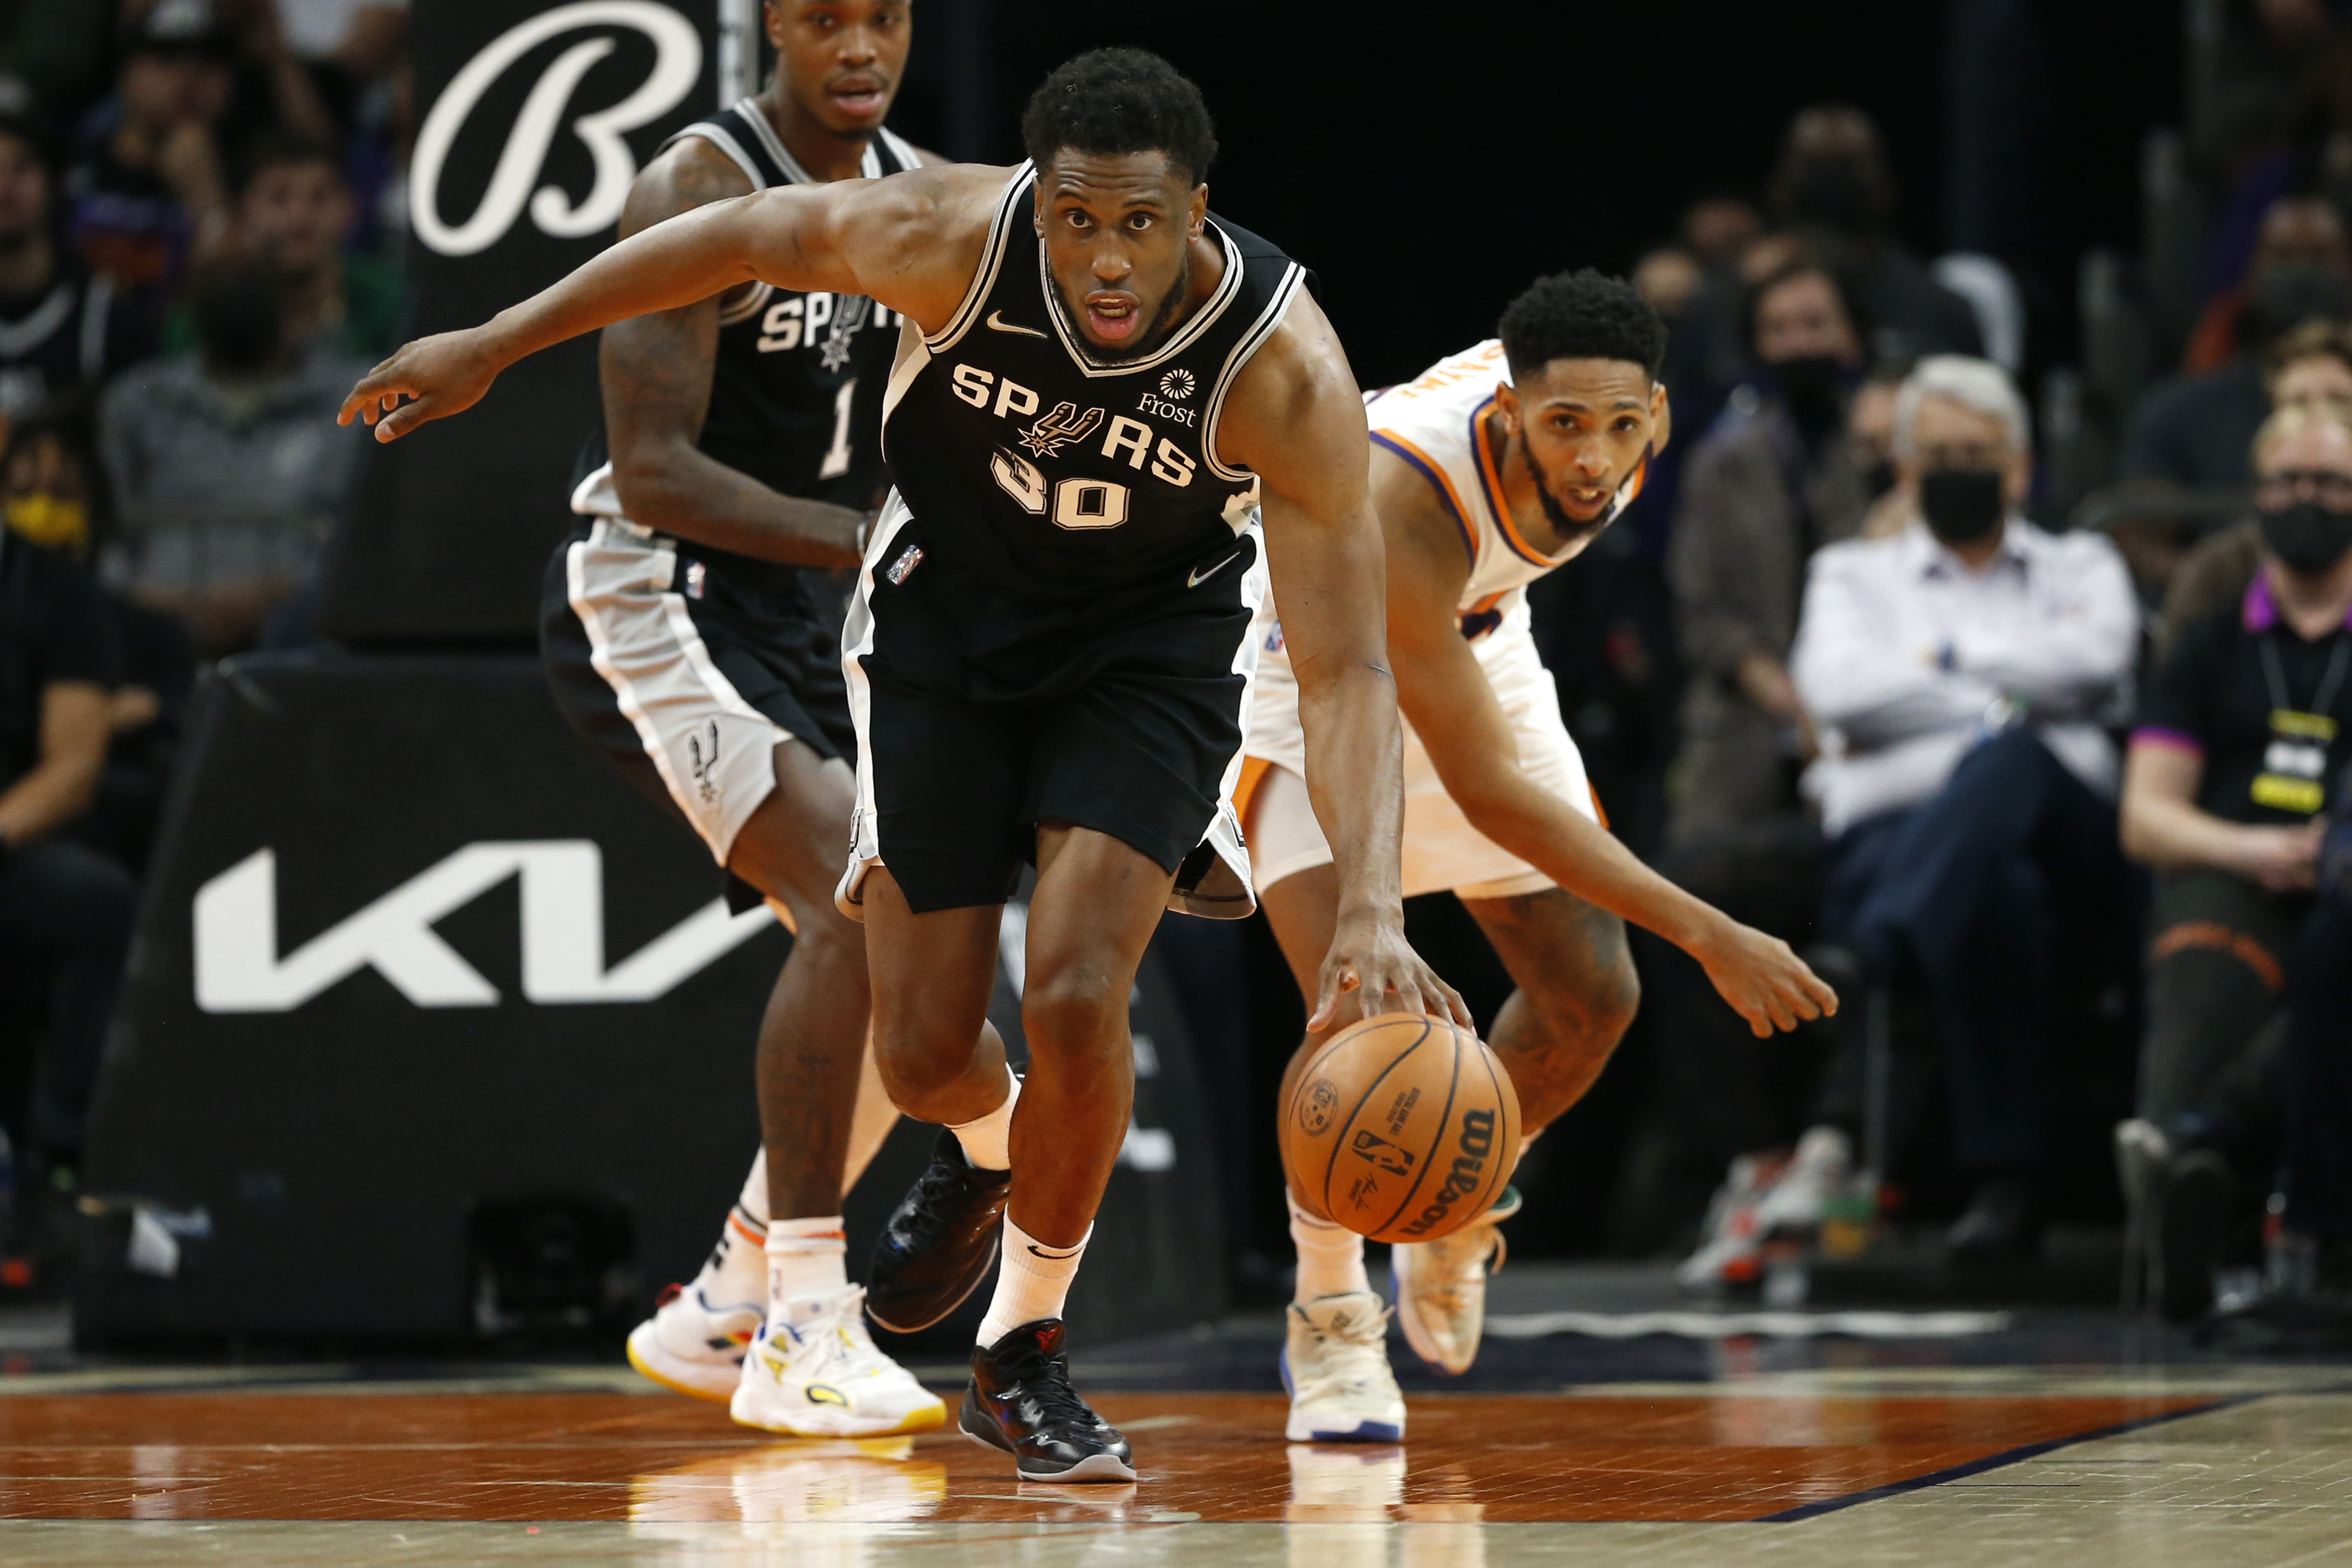 San Antonio Spurs forward Thaddeus Young dribbles the ball during a game against the Phoenix Suns